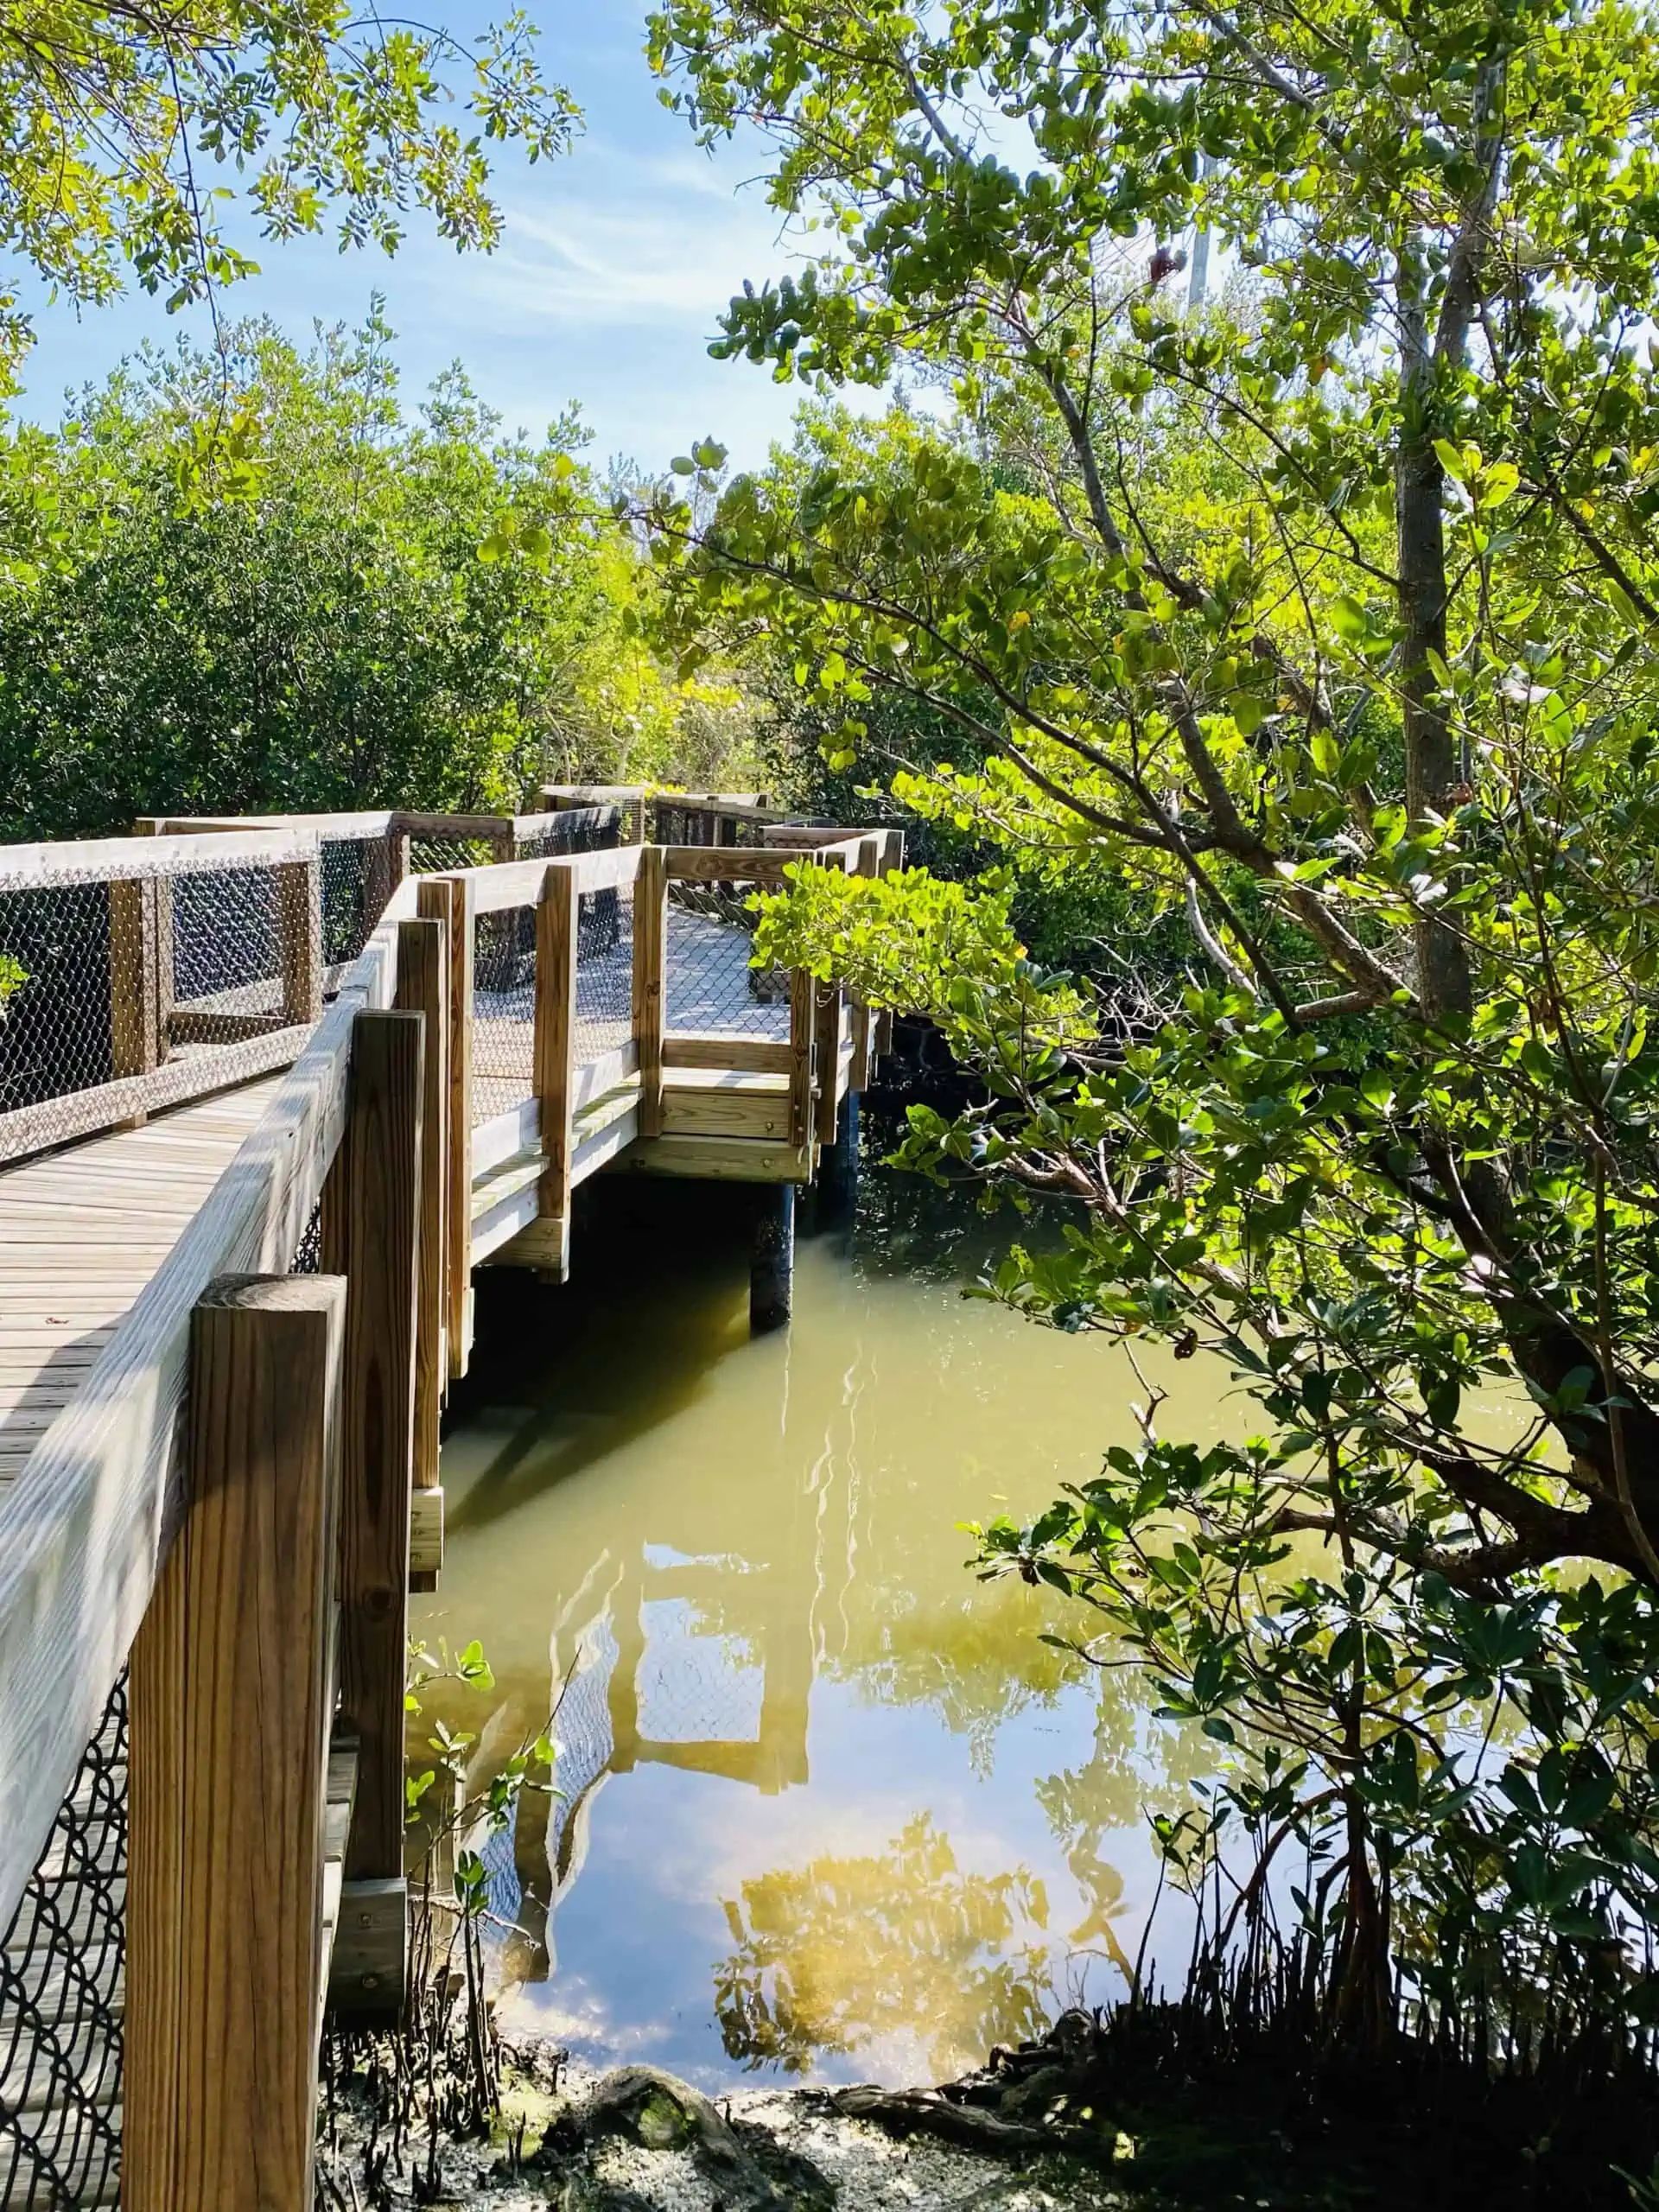 Clam Bayou Nature Preserve and Park has these beautiful ada accessible trails in Gulfport St Pete area.